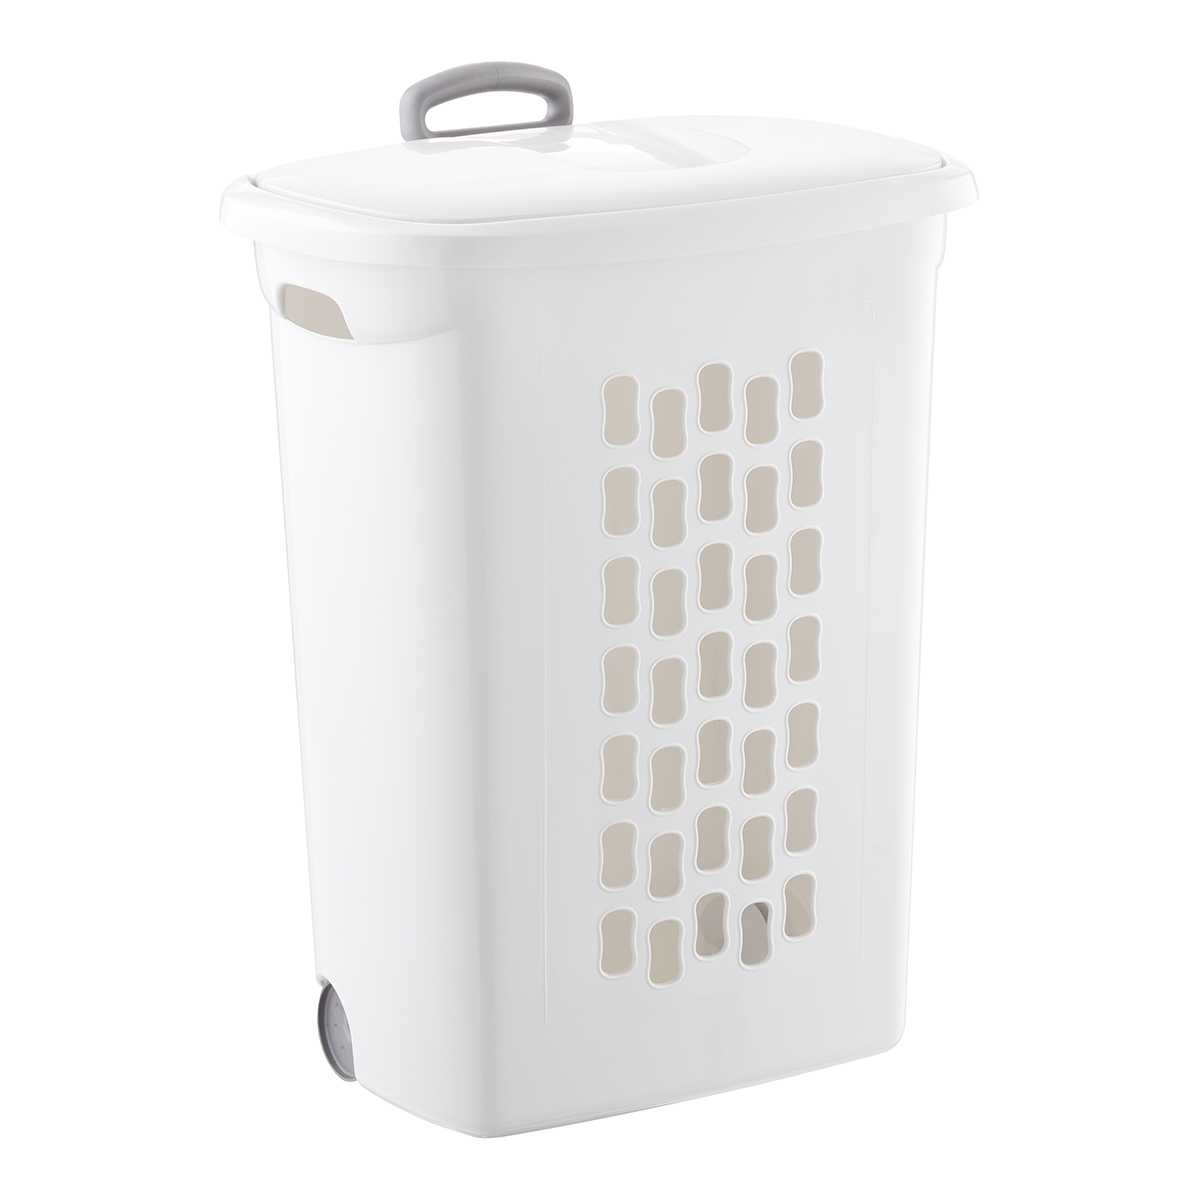 Case of 2 Hampers with Wheels White